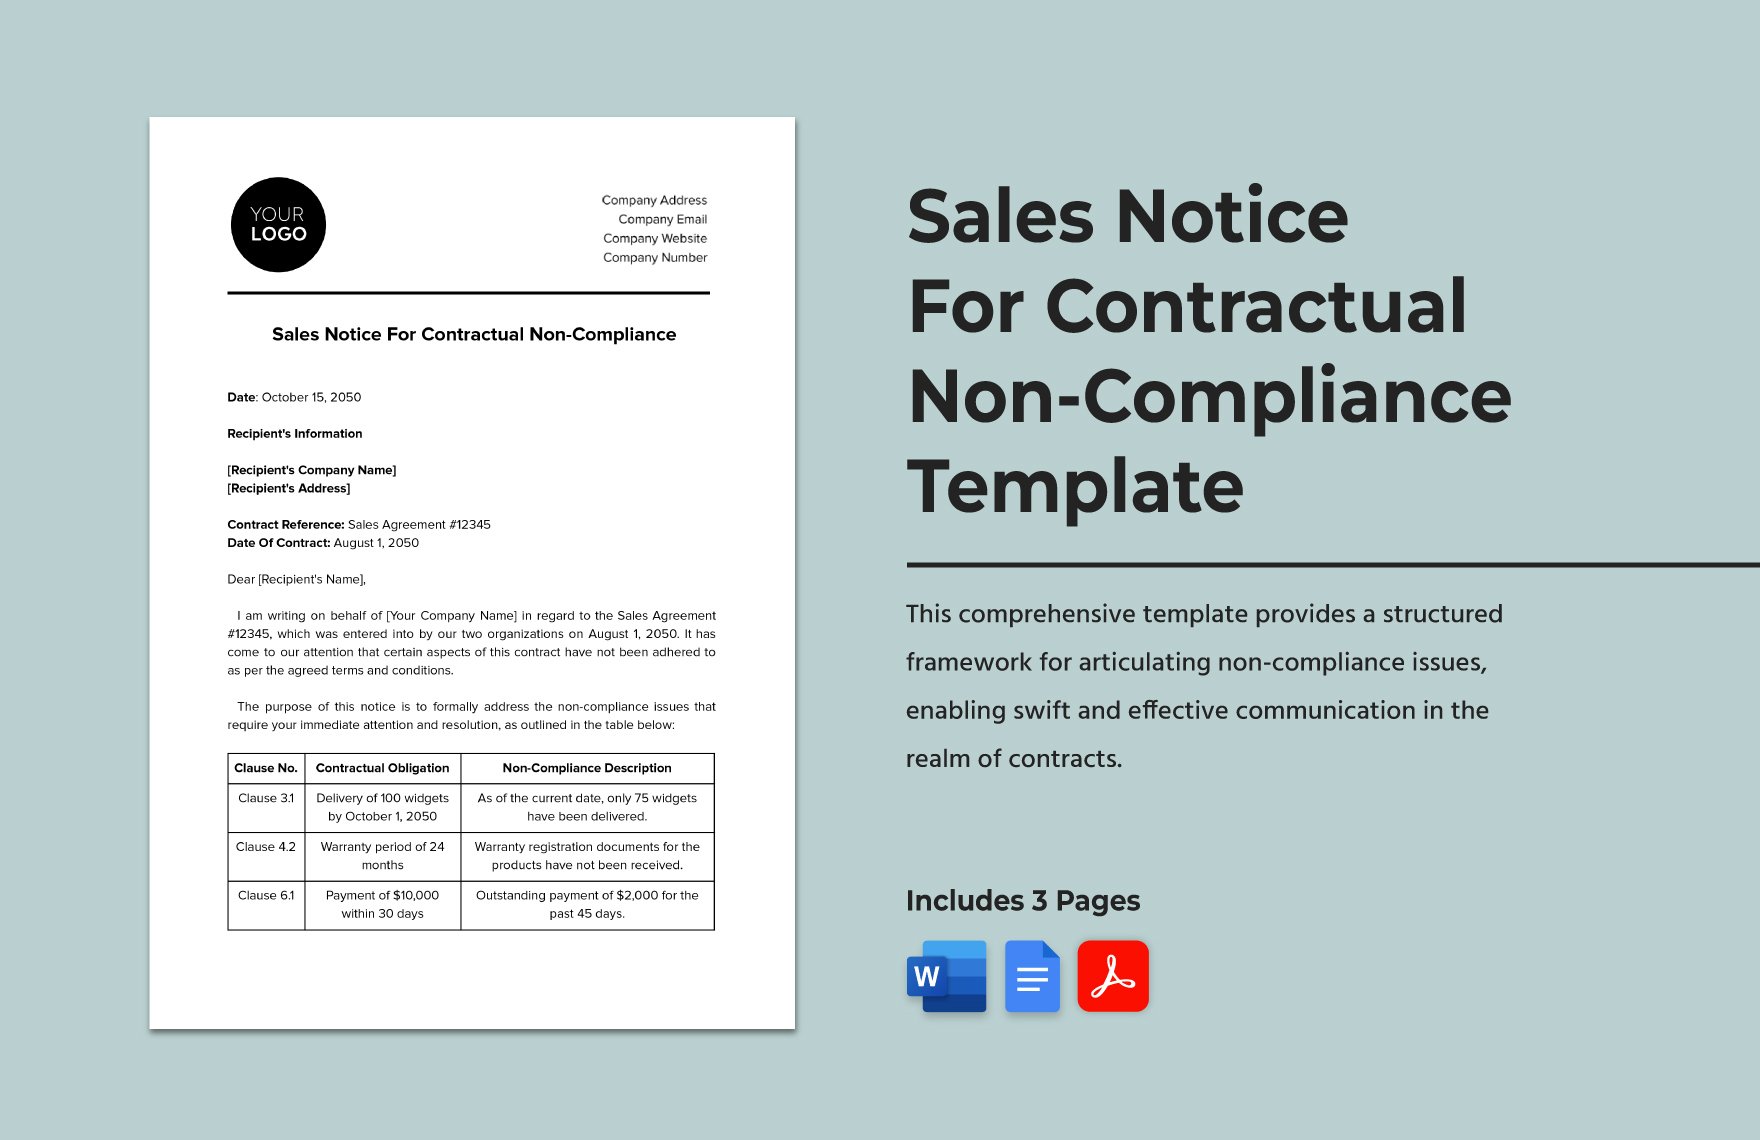 Sales Notice For Contractual Non-Compliance Template